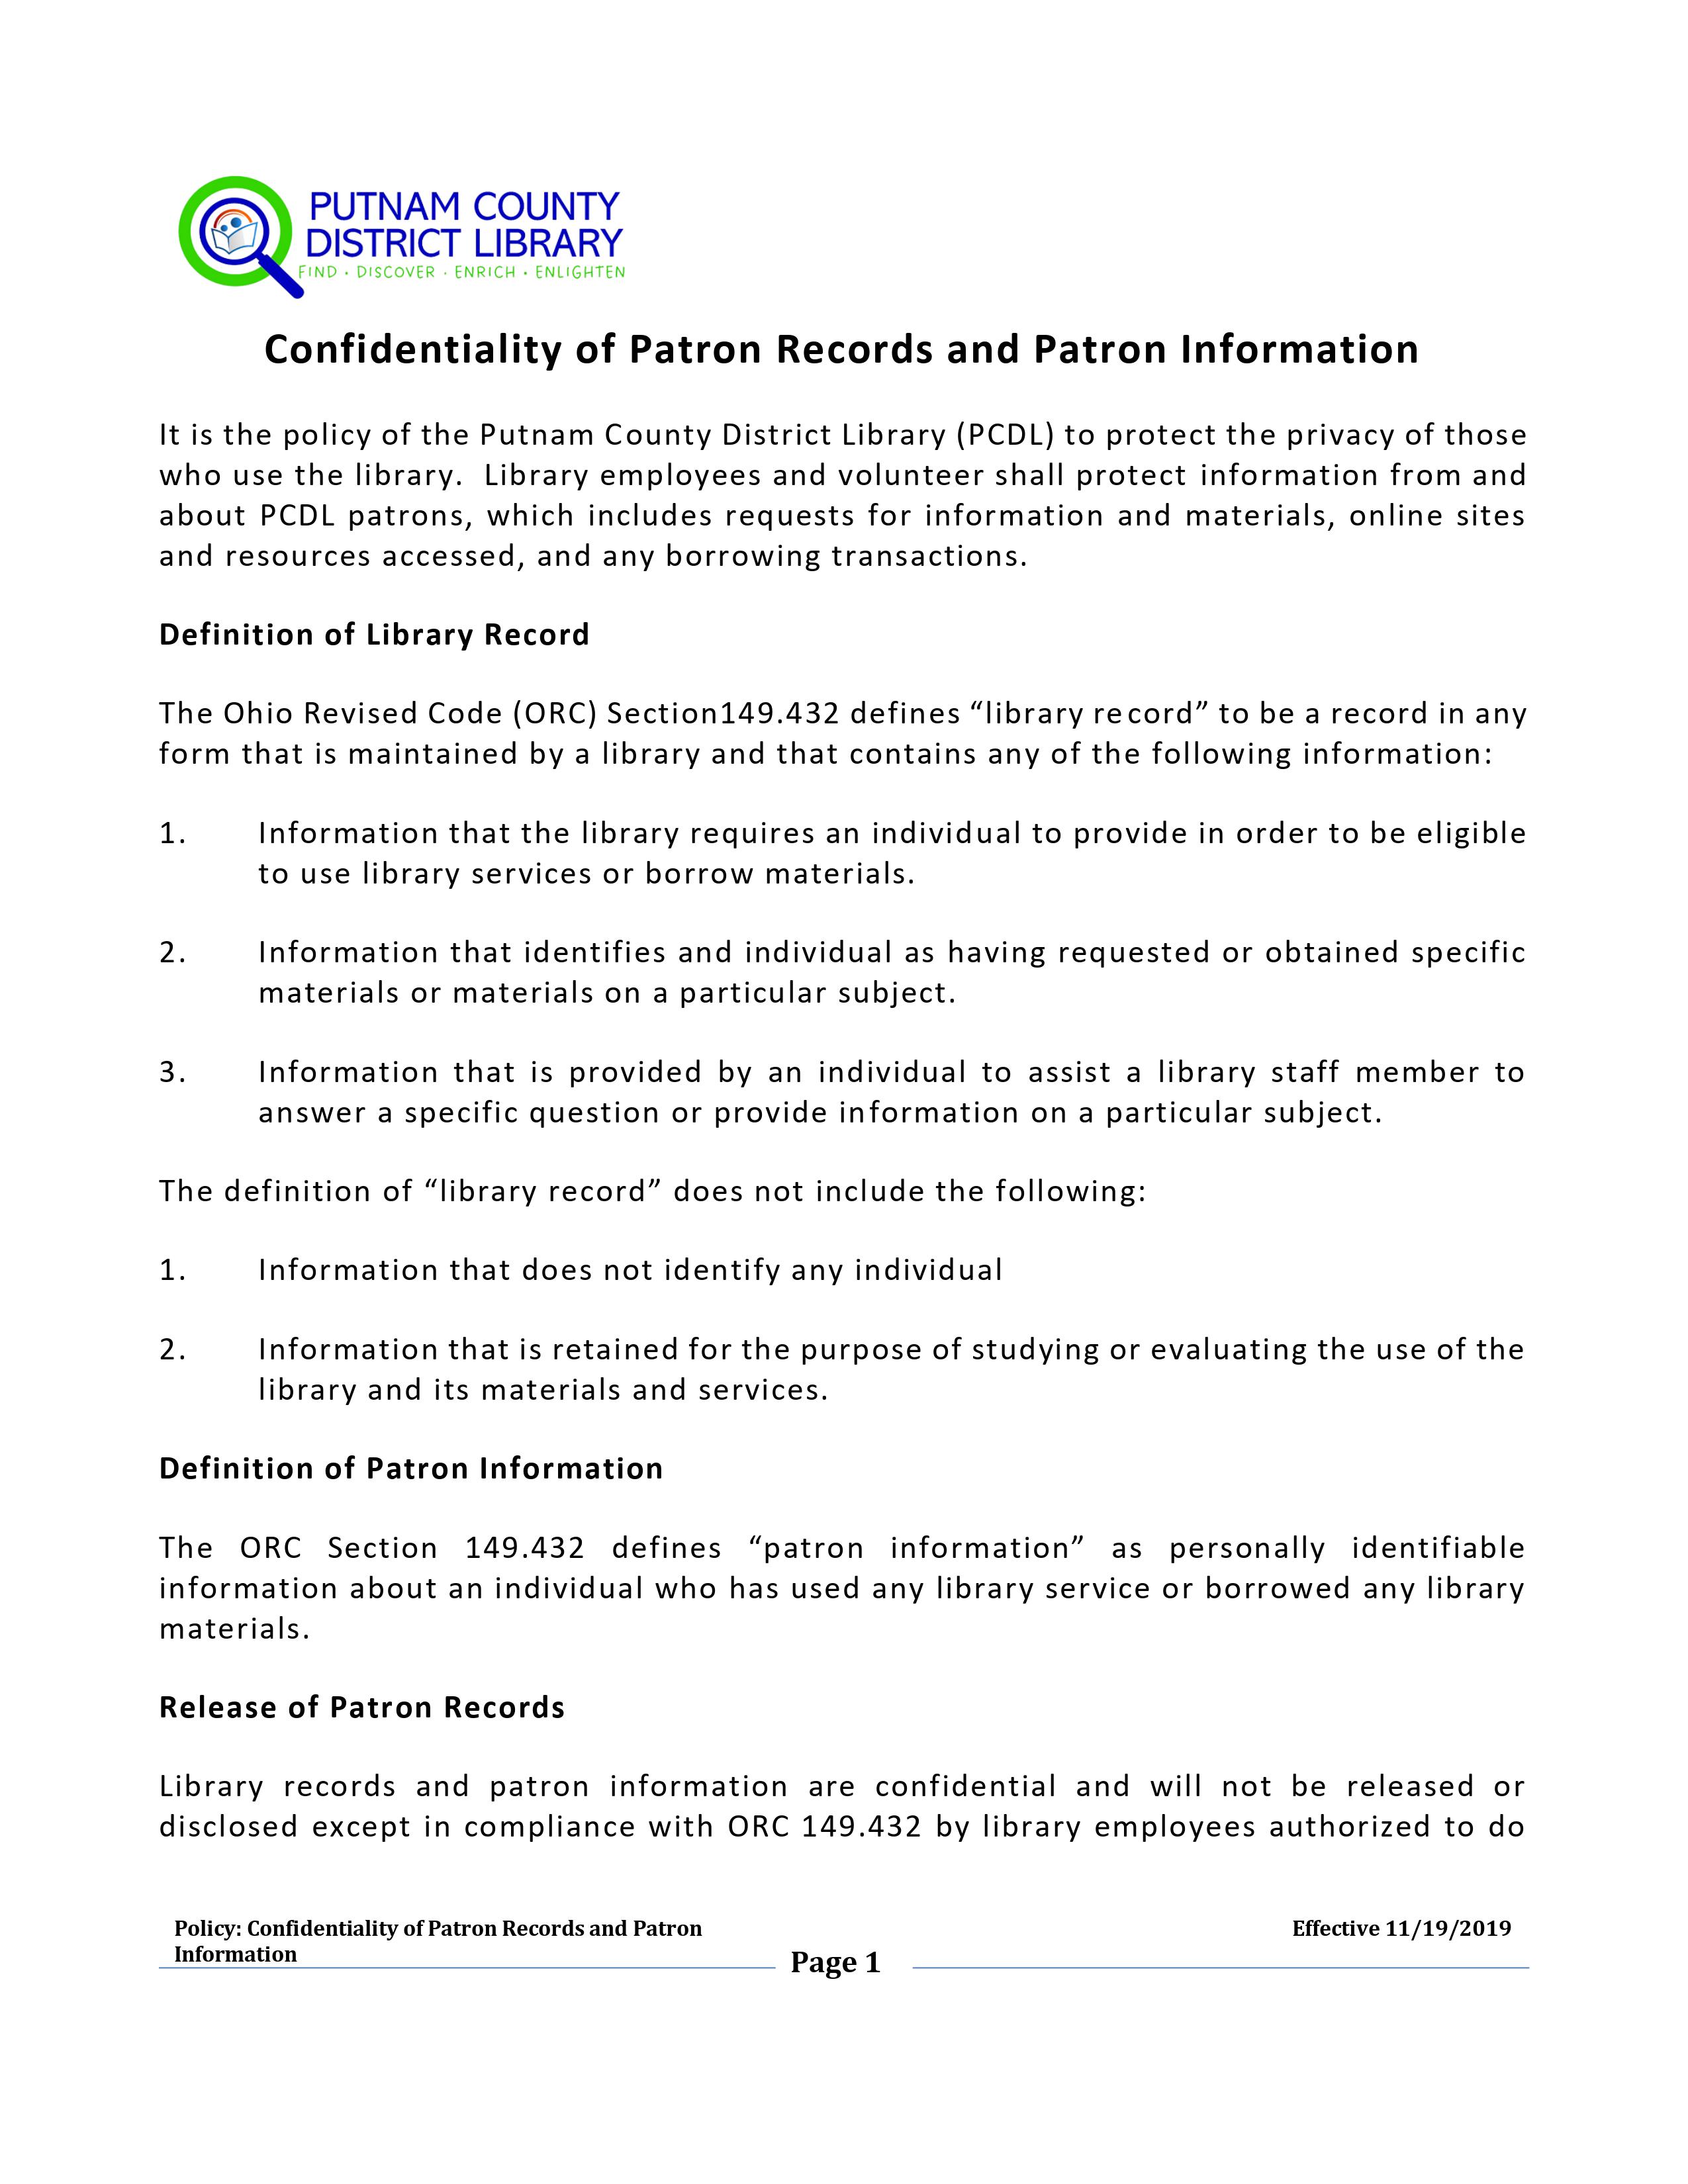 Confidentiality of Patron records and Patron Information page 1